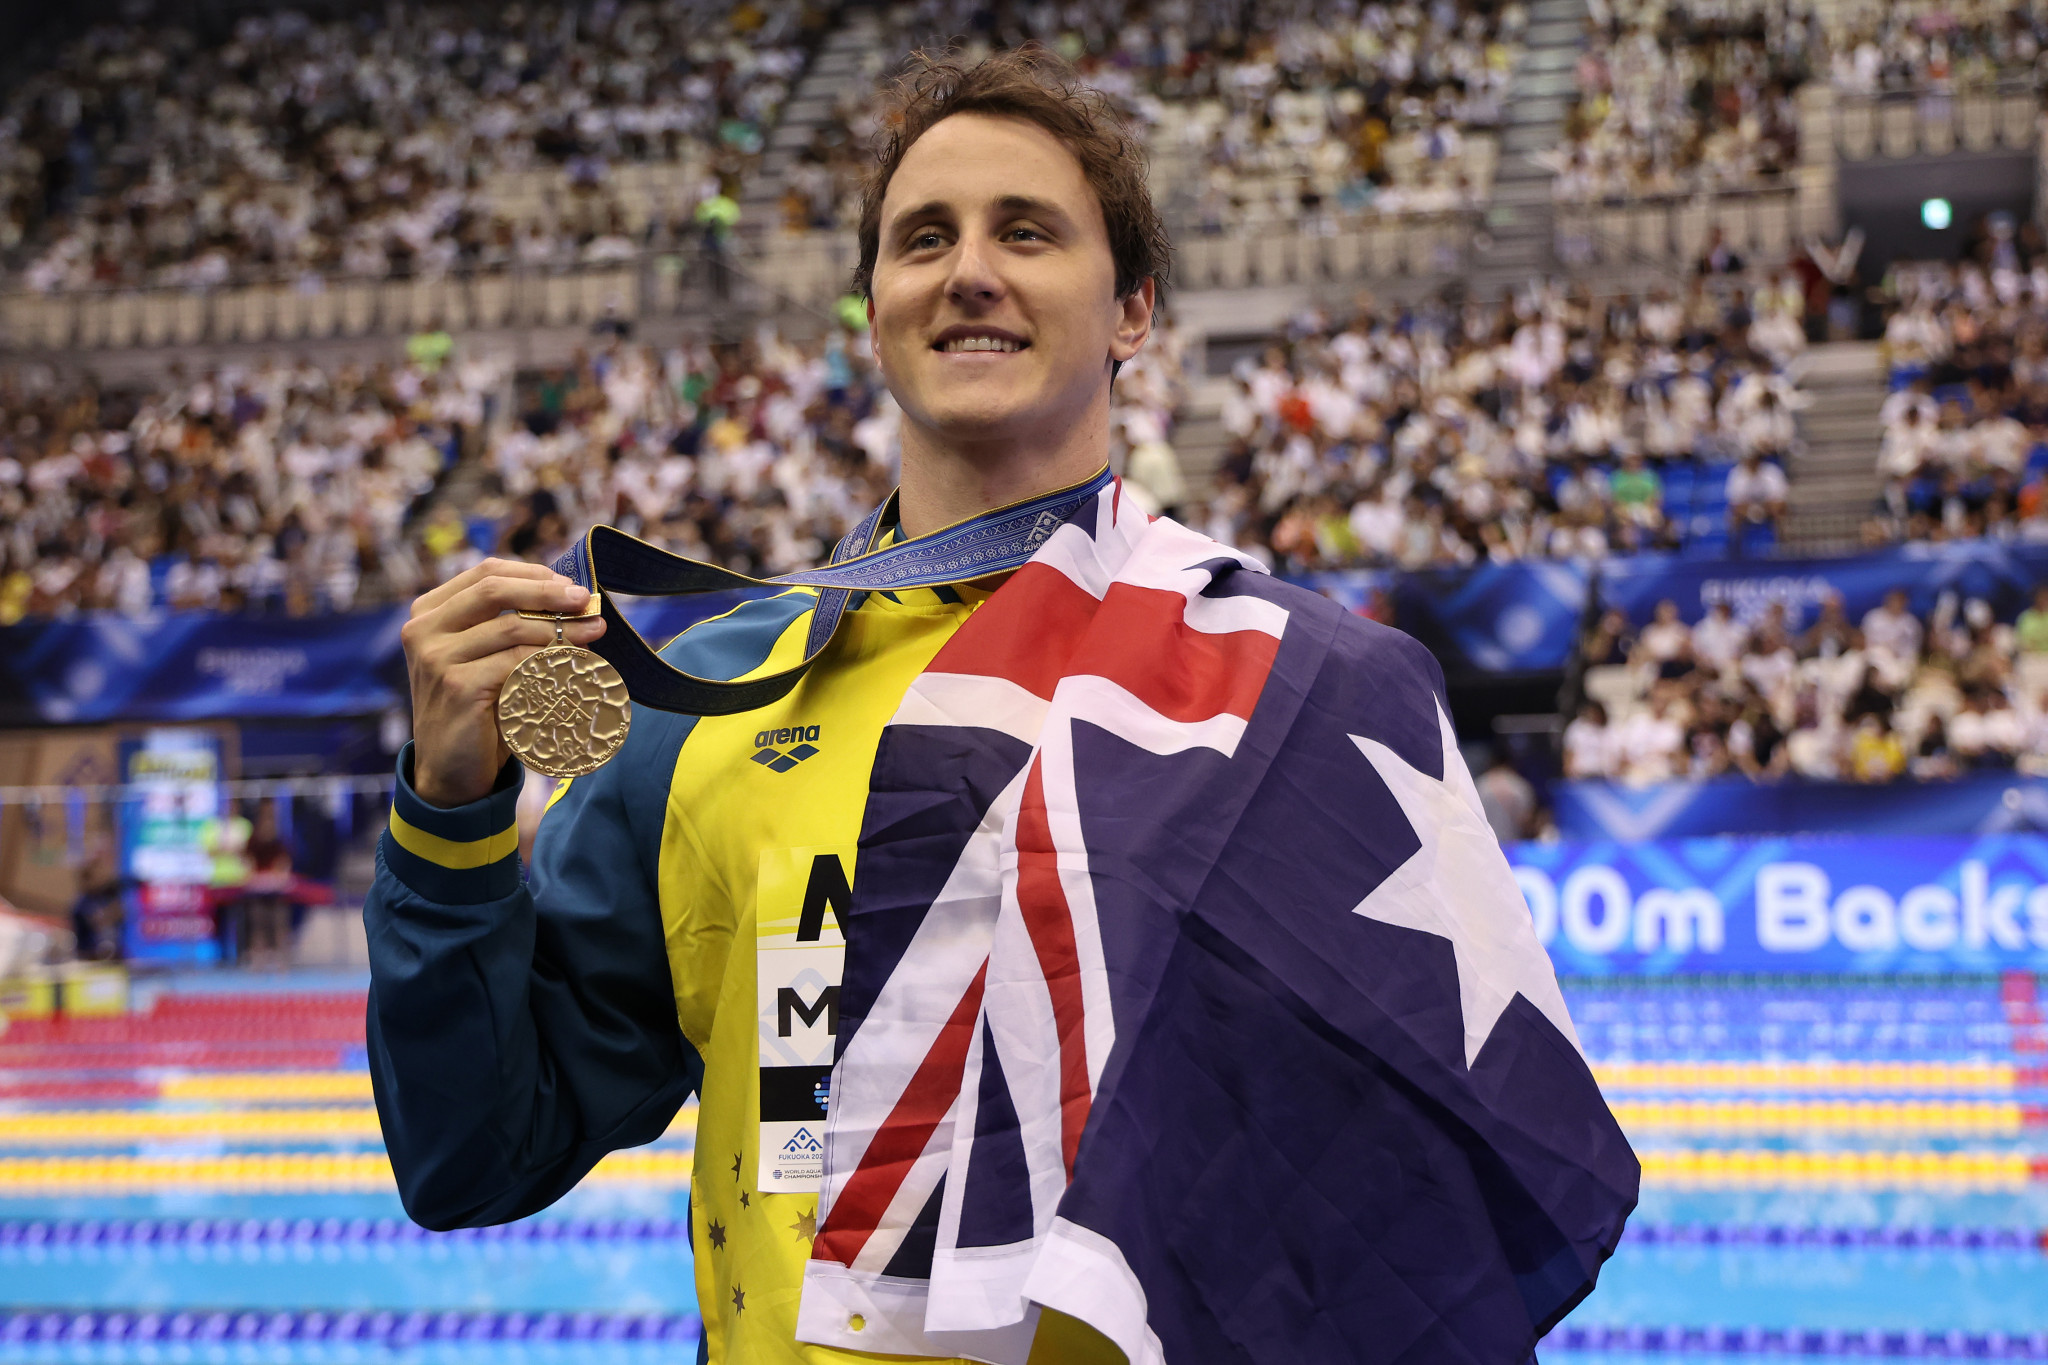 Cameron McEvoy secured his spot at Paris 2024 with an impressive 50m freestyle performance on Wednesday night. GETTY IMAGES